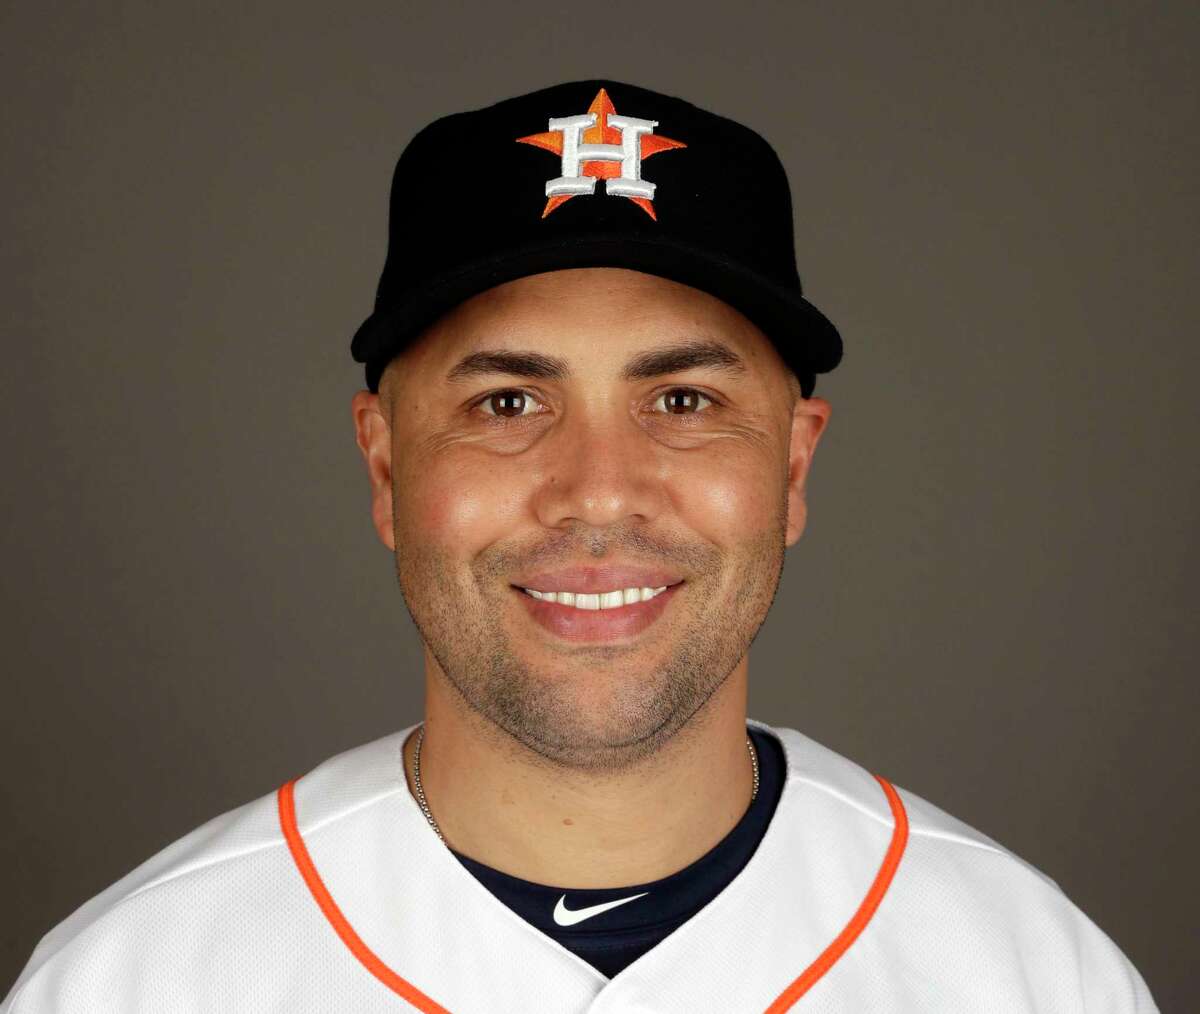 FILE - This is a 2017 file photo showing Carlos Beltran of the Houston Astros. Beltran is retiring after winning his first World Series title in his 20th major league season. The 40-year-old made the announcement Monday, Nov. 13, 2017, 12 days after the Astros beat the Los Angeles Dodgers in Game 7 of the World Series. (AP Photo/David J. Phillip, File)